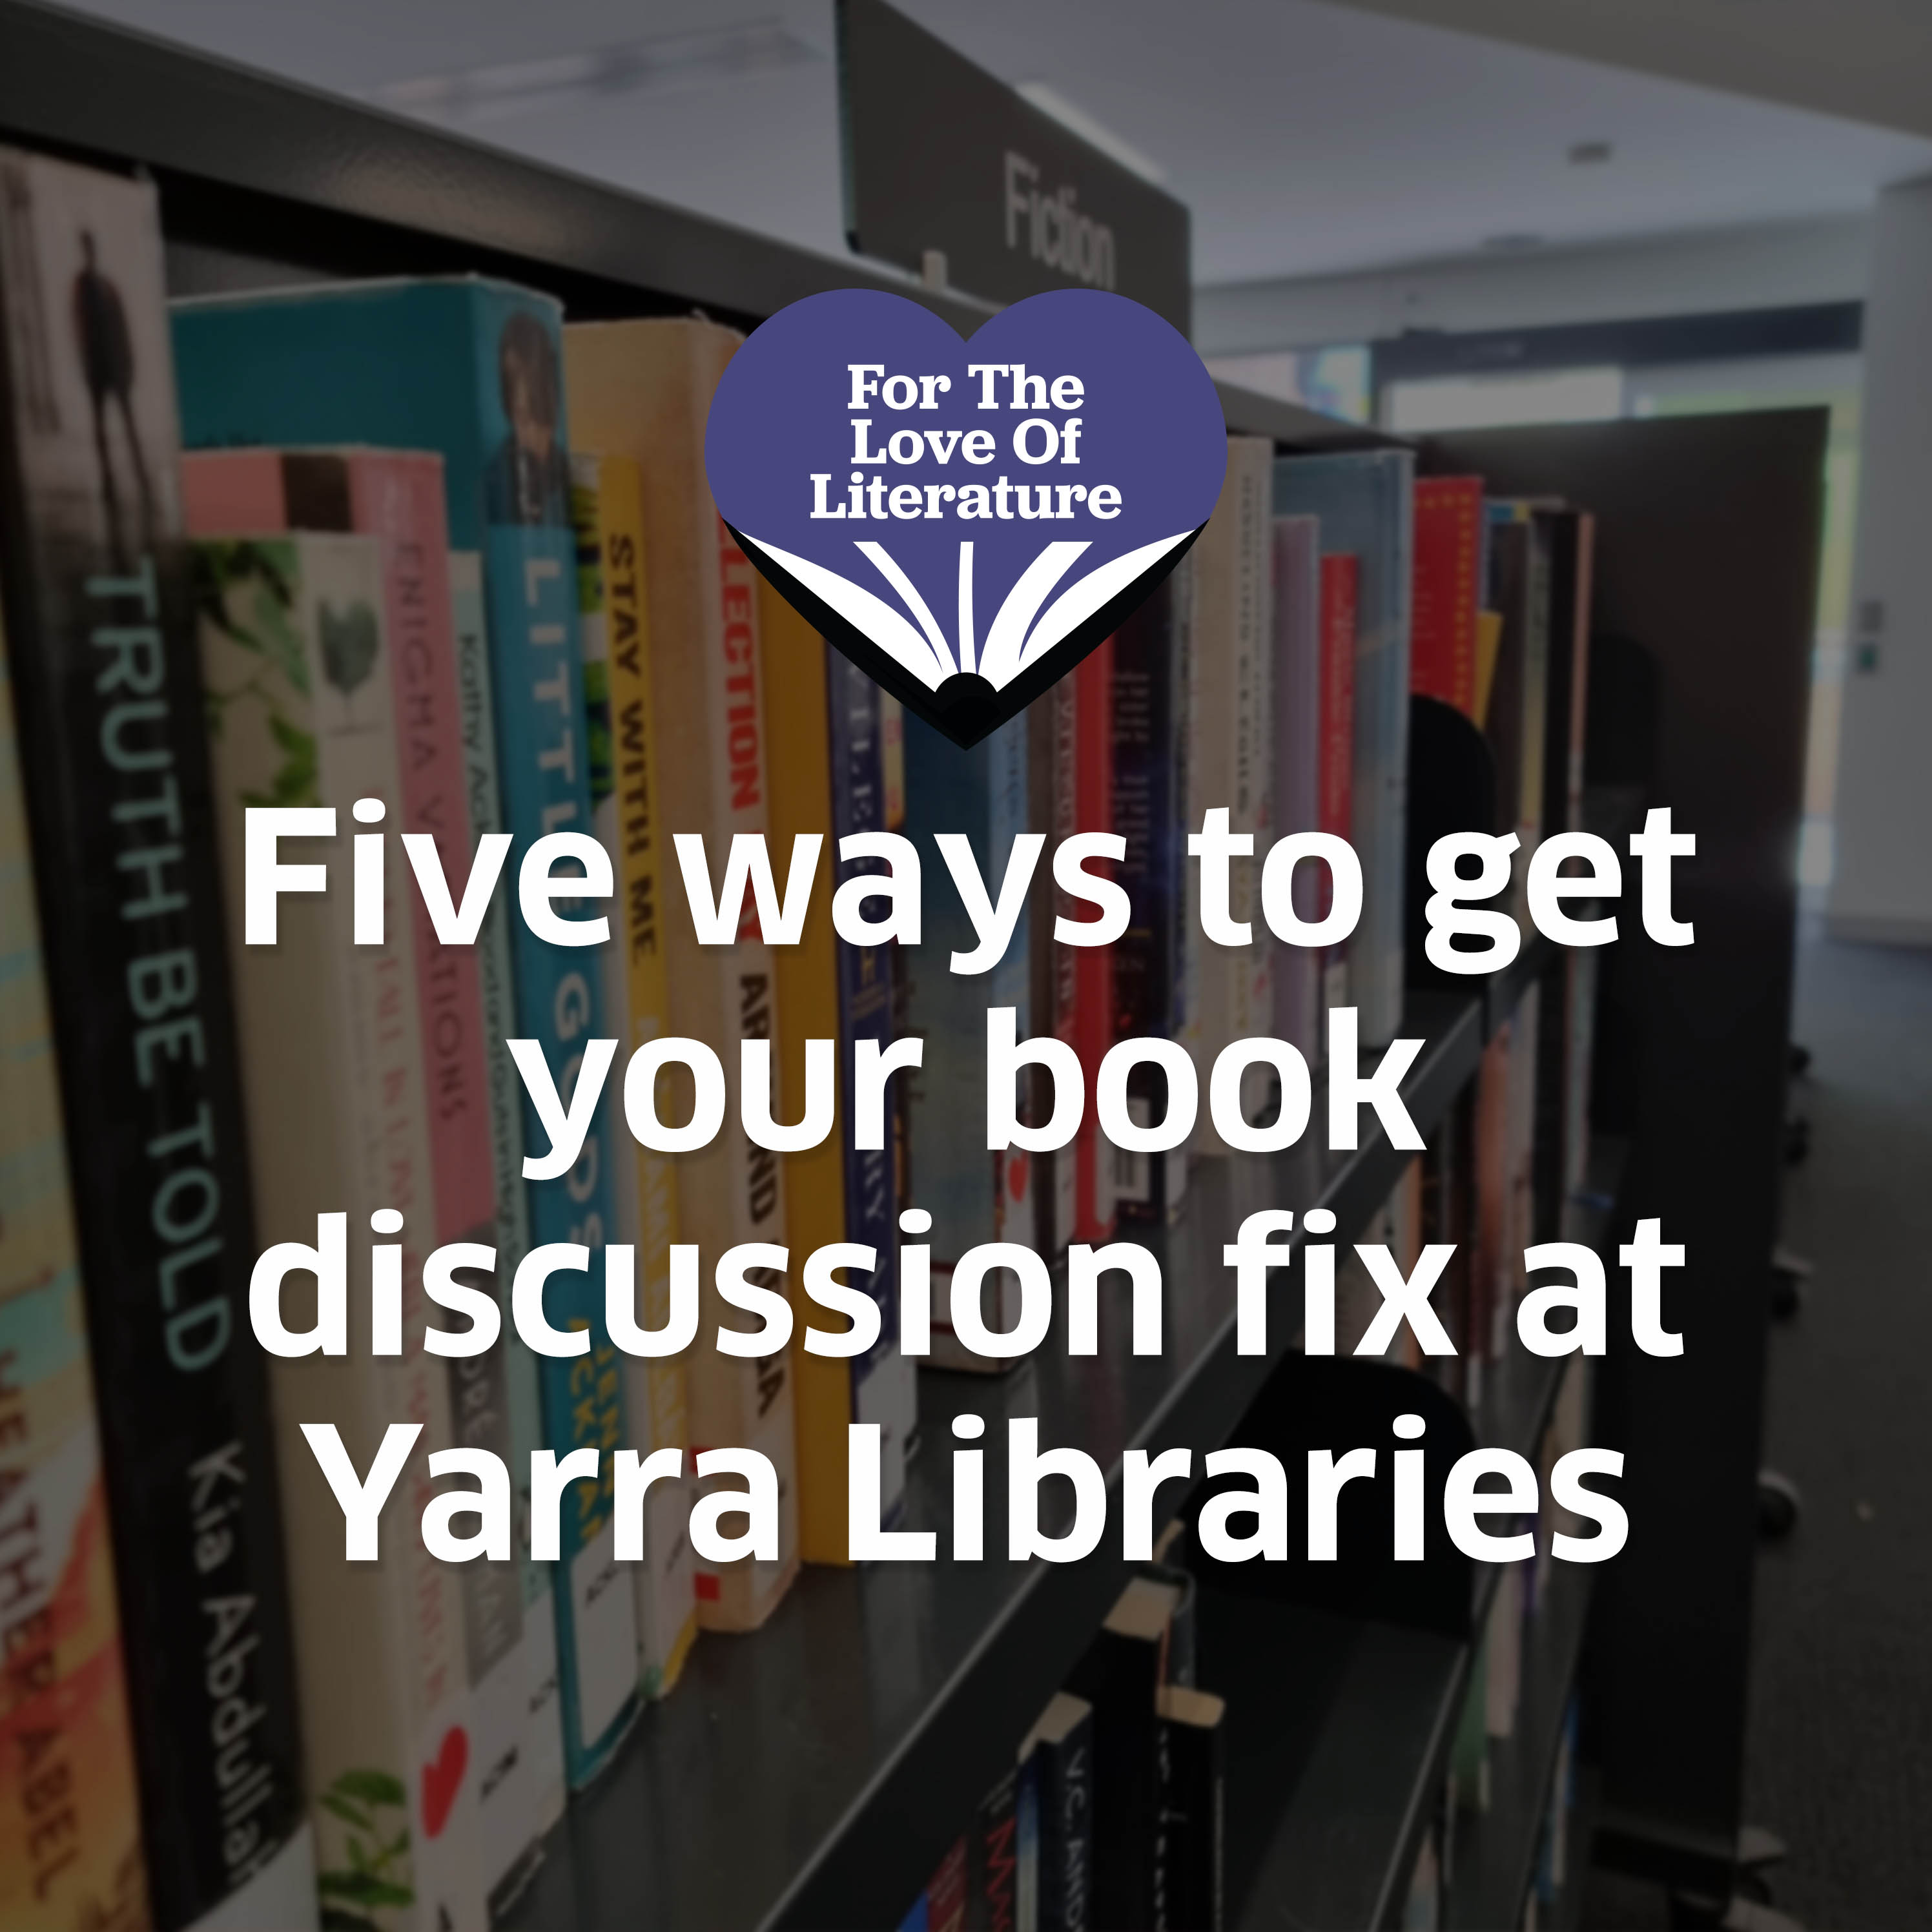 A darkened photo of a library shelf has superimposed text reading "Five ways to get your book discussion fix at Yarra Libraries". There is a purple heart logo above that reads "For the love of literature"